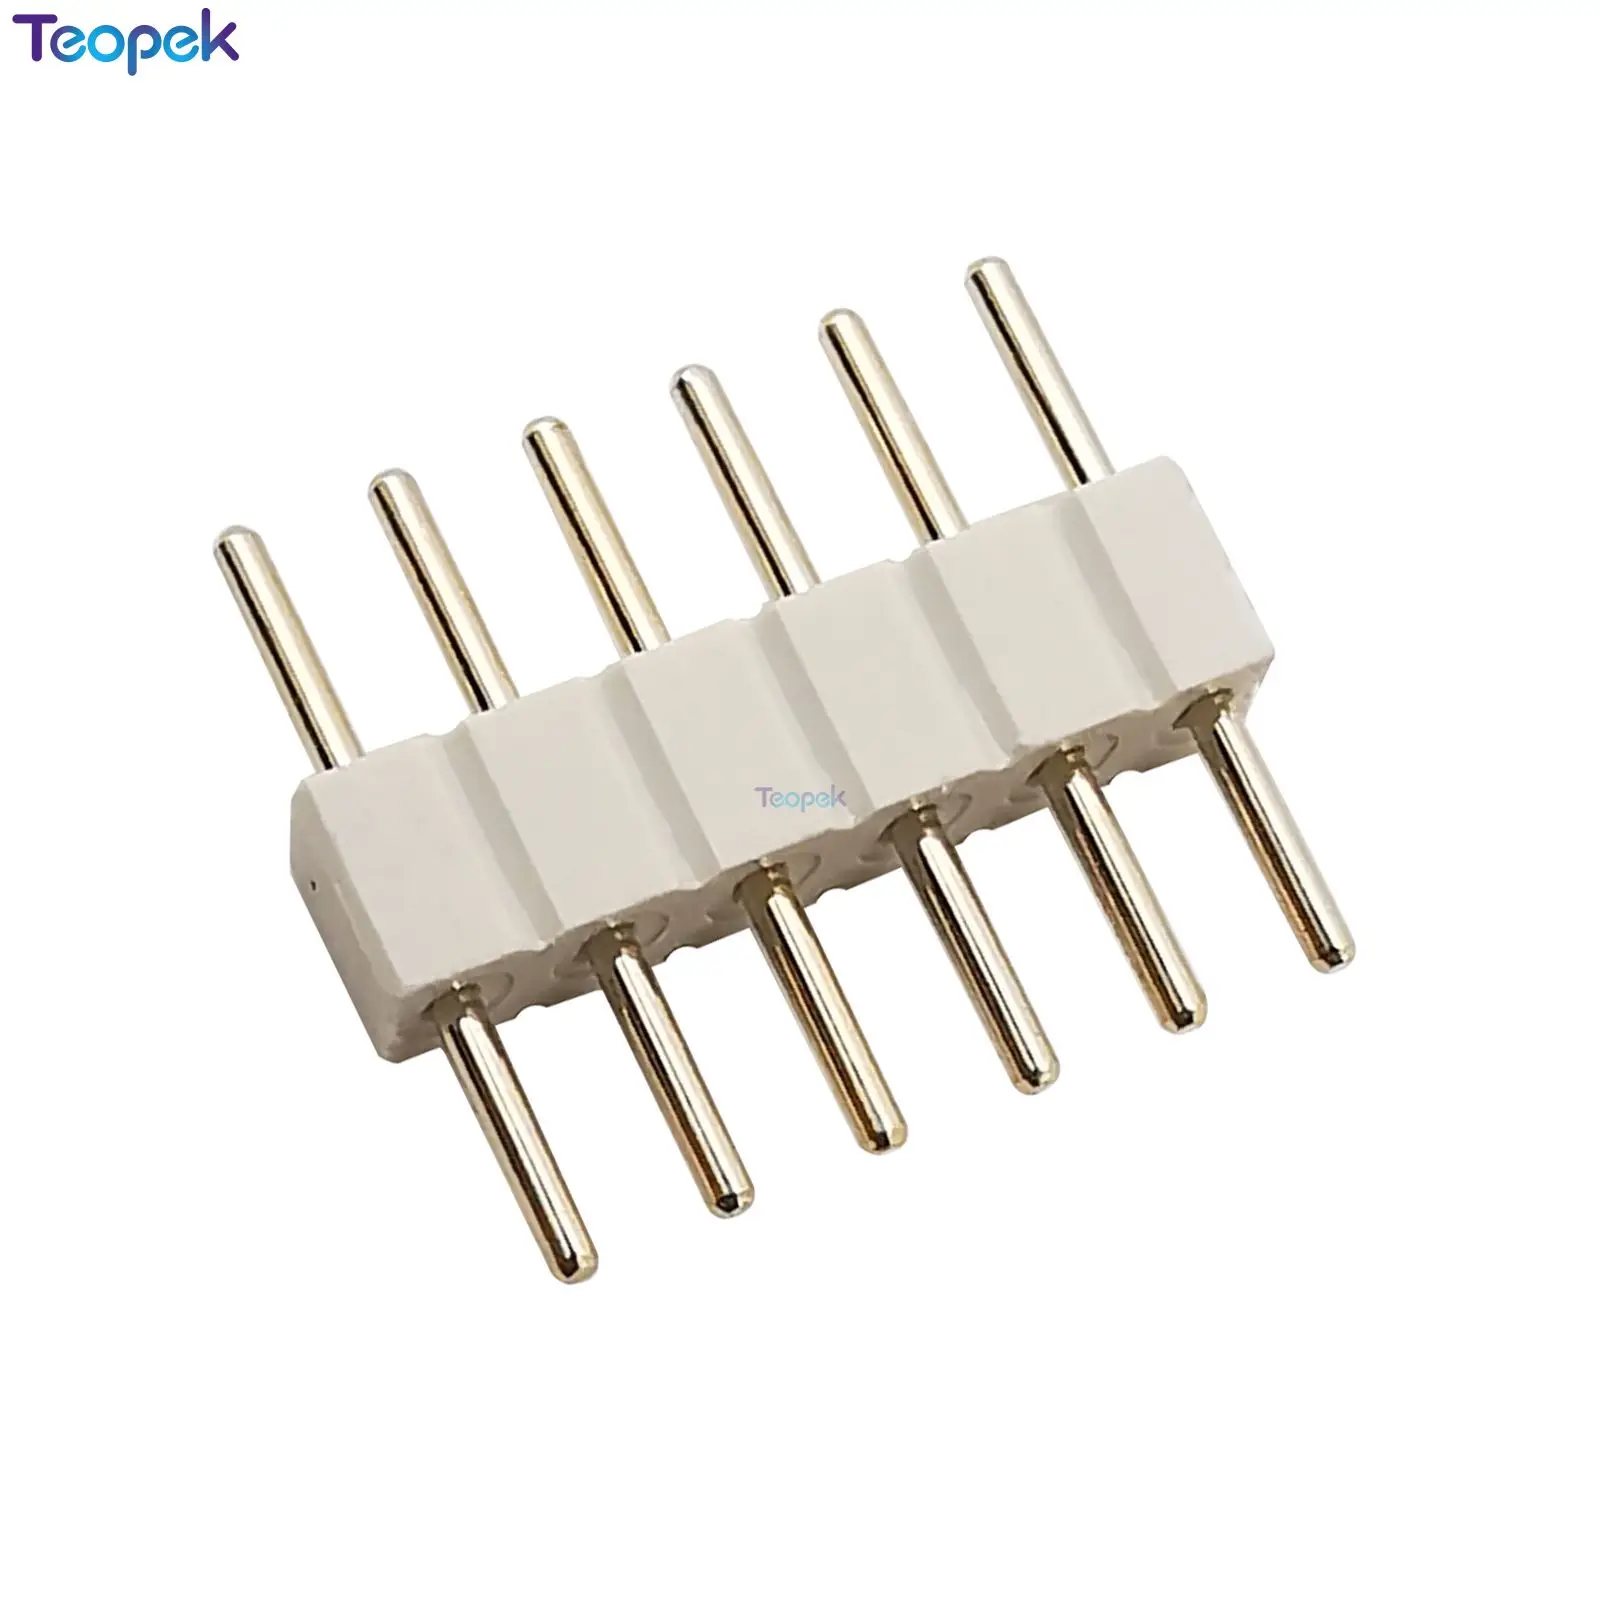 

6Pin RGBCCT Splitter Connector 1 to 2, 1 to 3, 1 to 4 Female Extension Wire Cable for RGB+CCT Led Strip 2.0mm Pin Distance